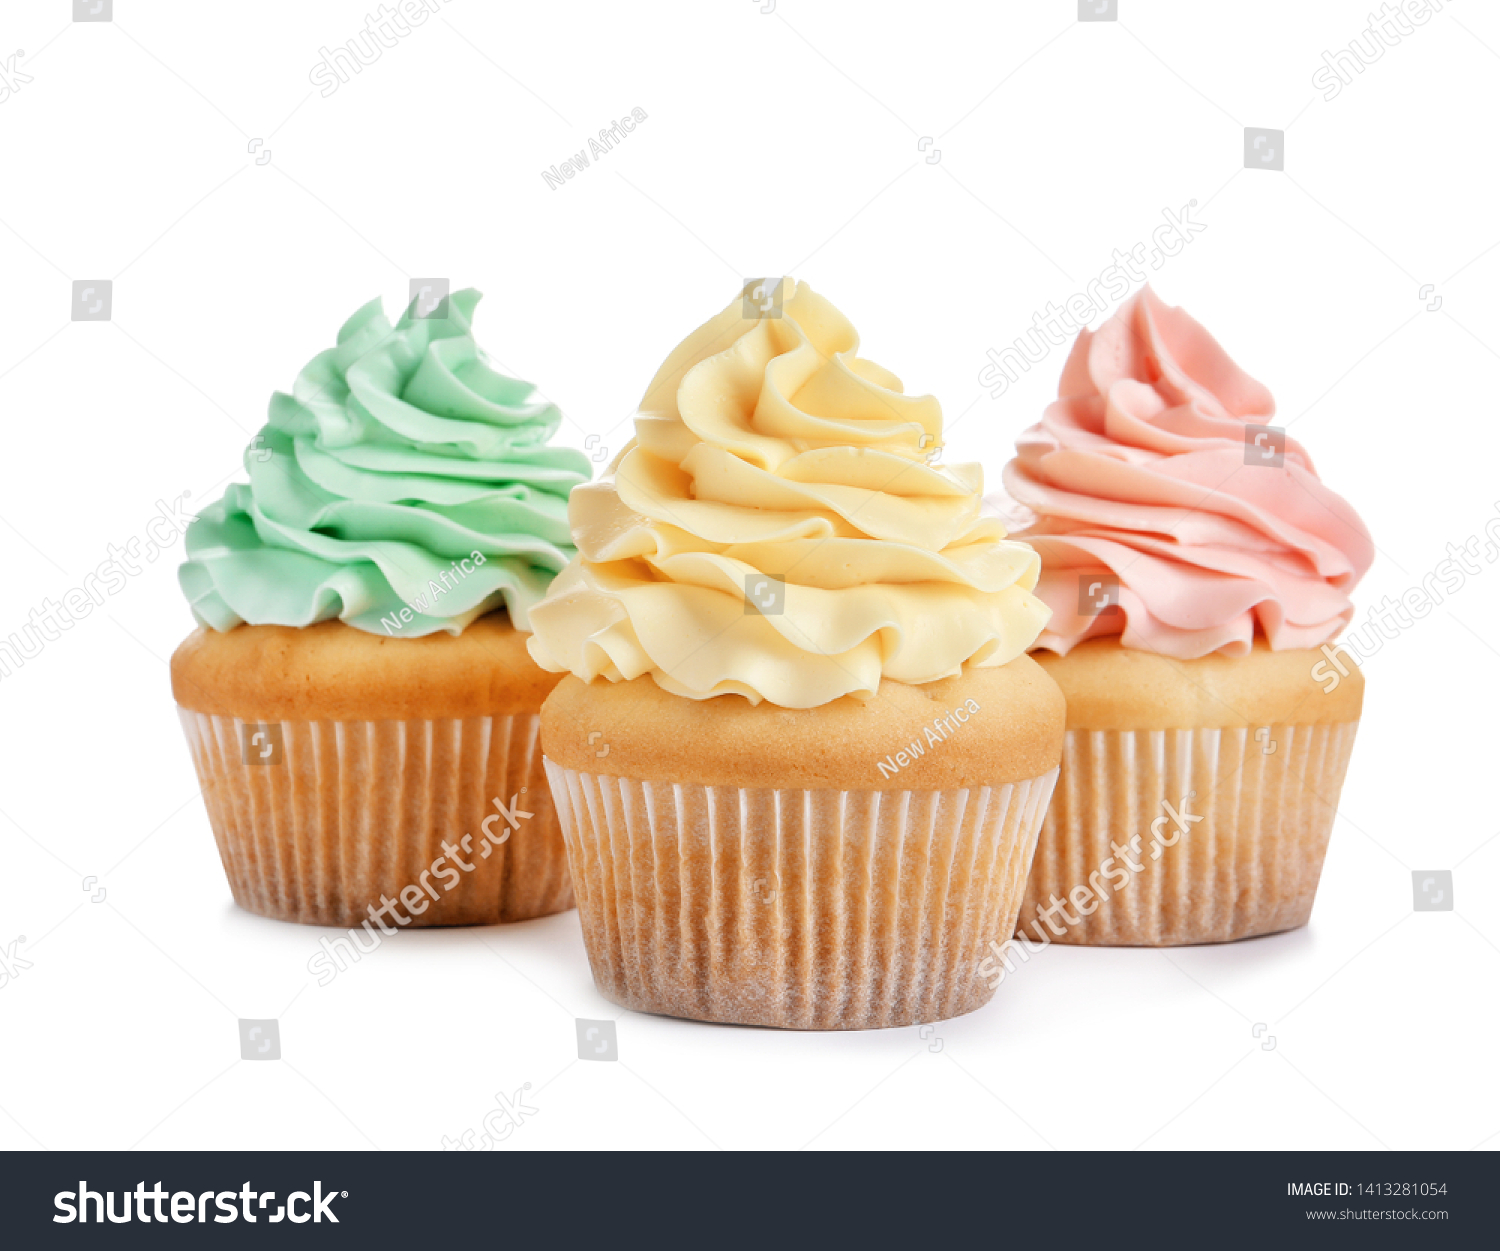 Delicious cupcakes with cream on white background #1413281054